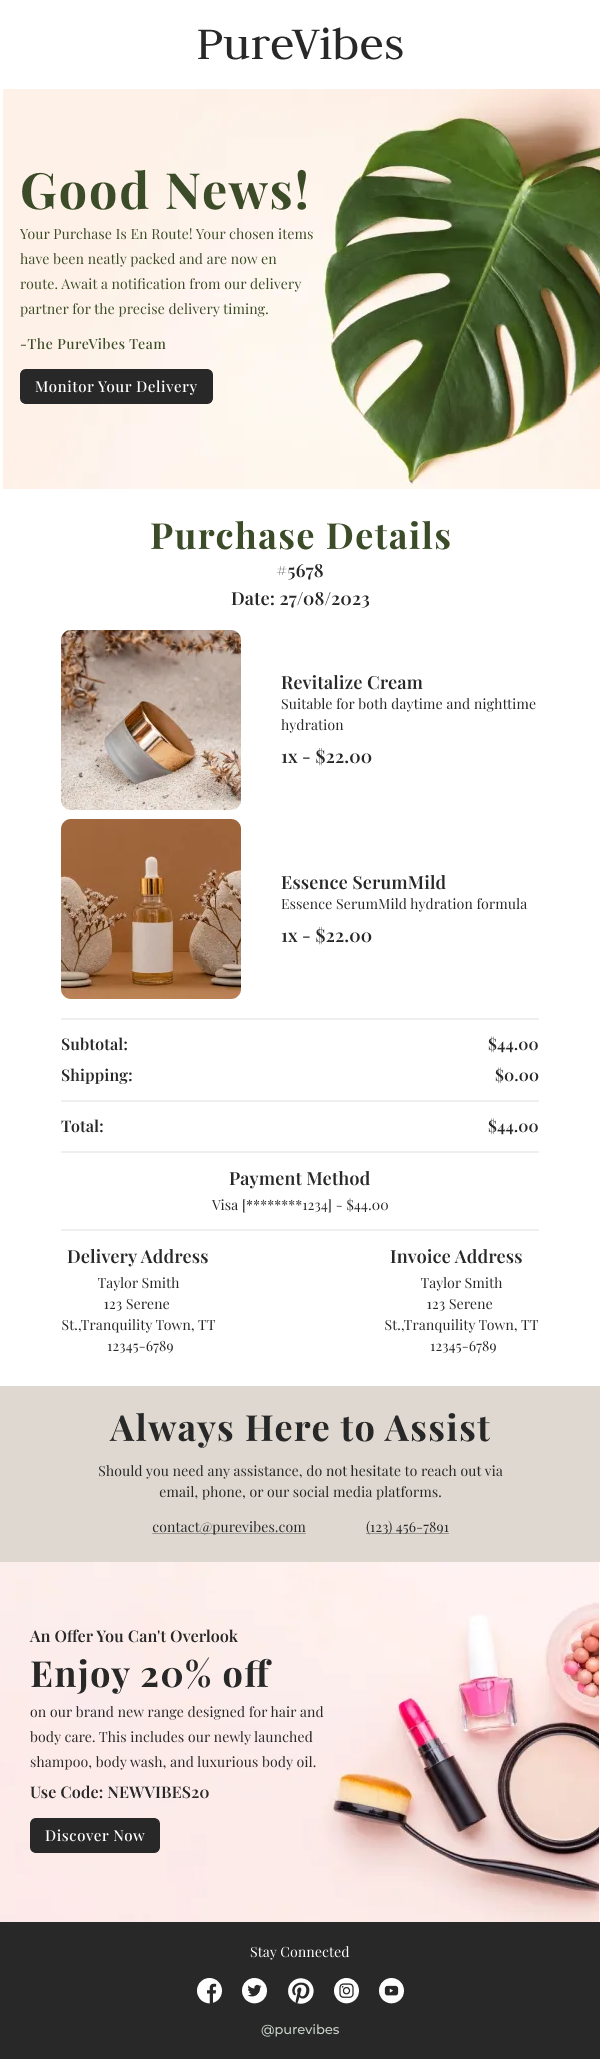 Beauty-Purchase Details